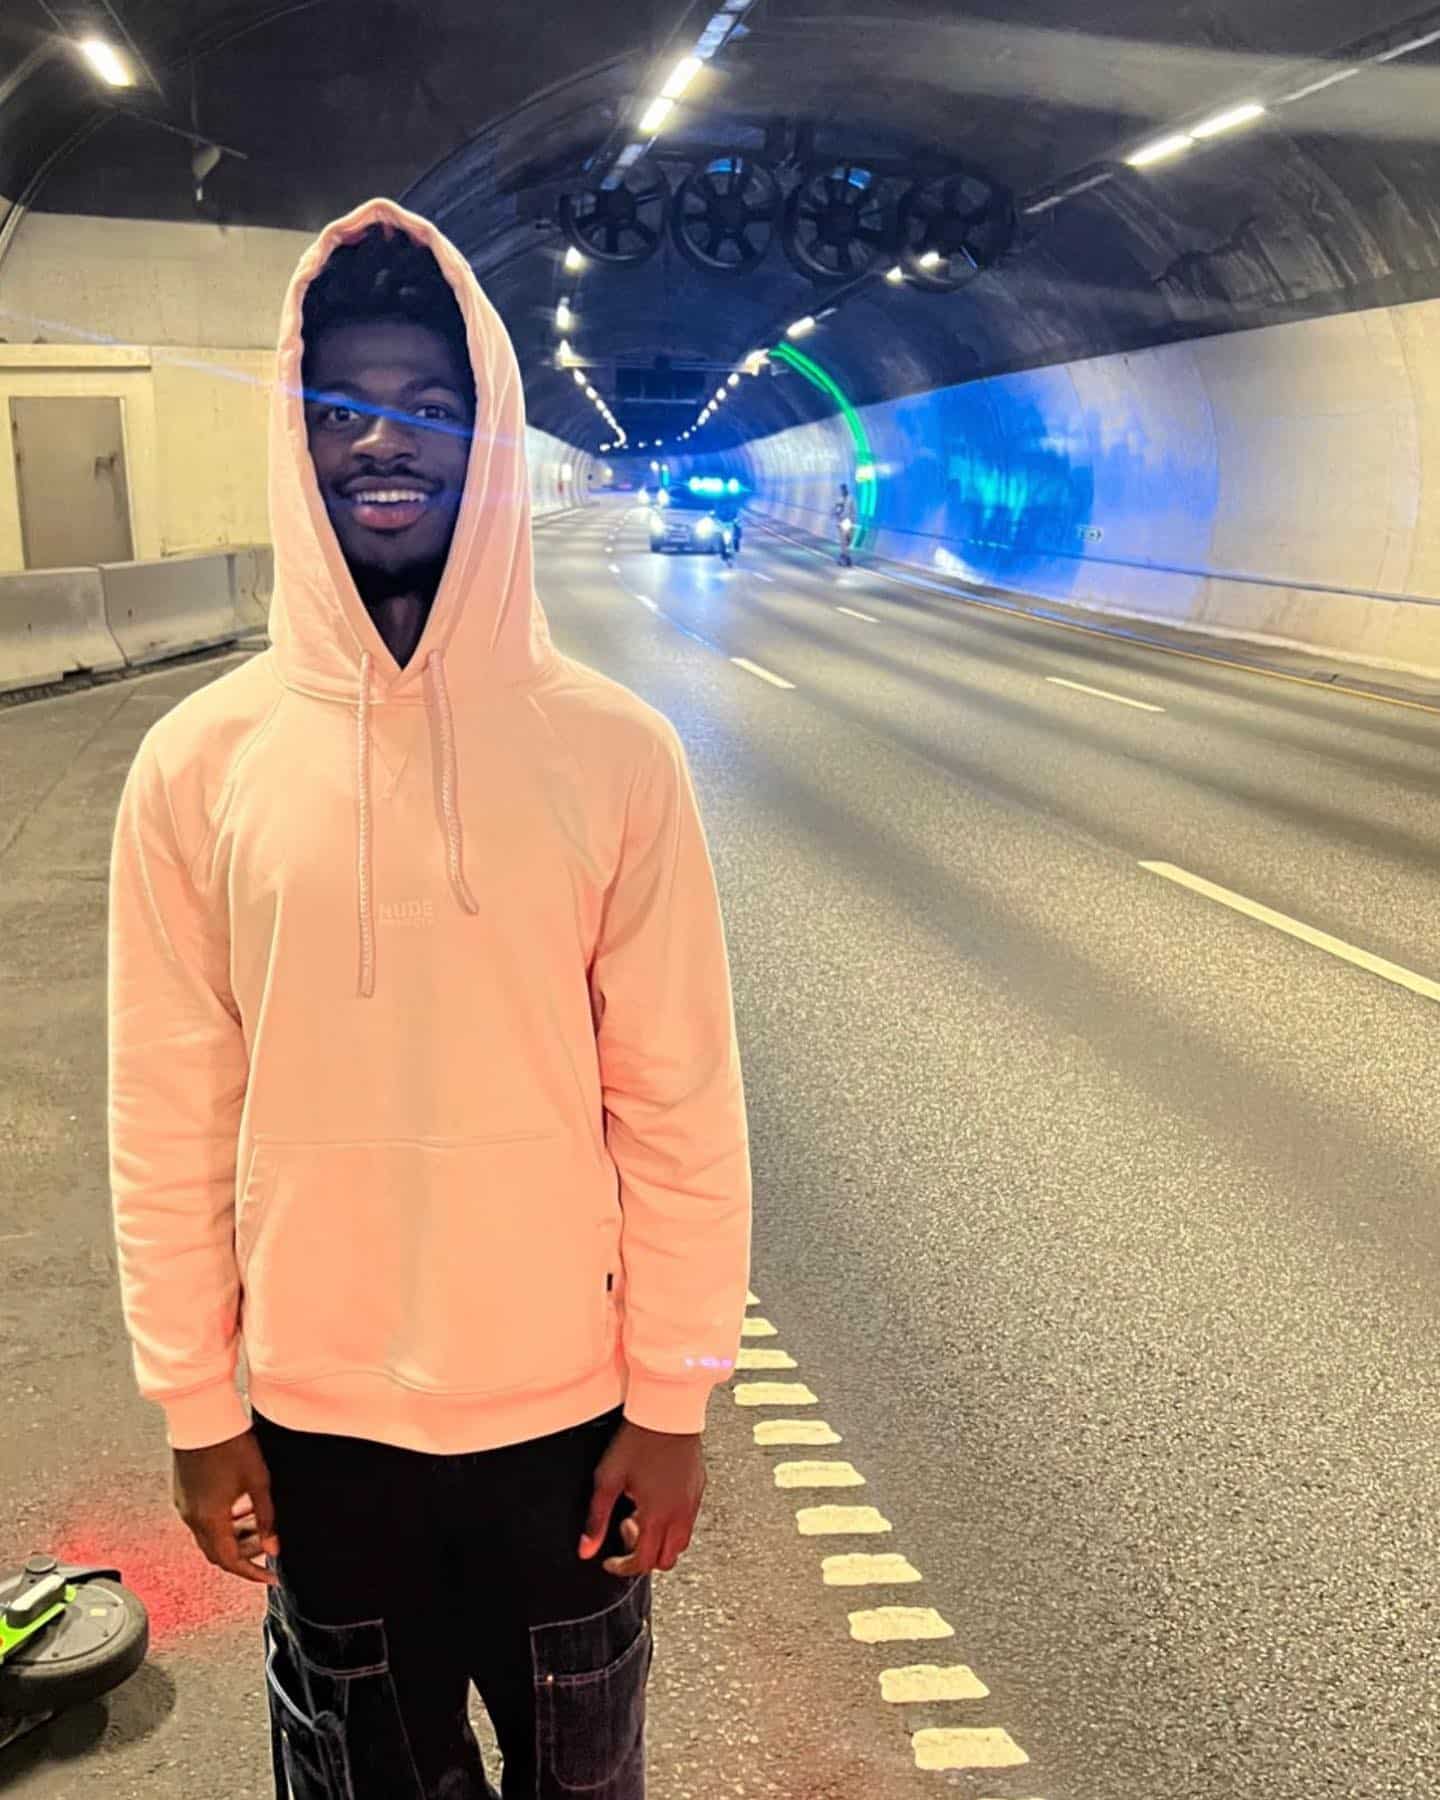 lil-nas-x-oslo-norway-police norge 730no 2 About to go to jail in Norway